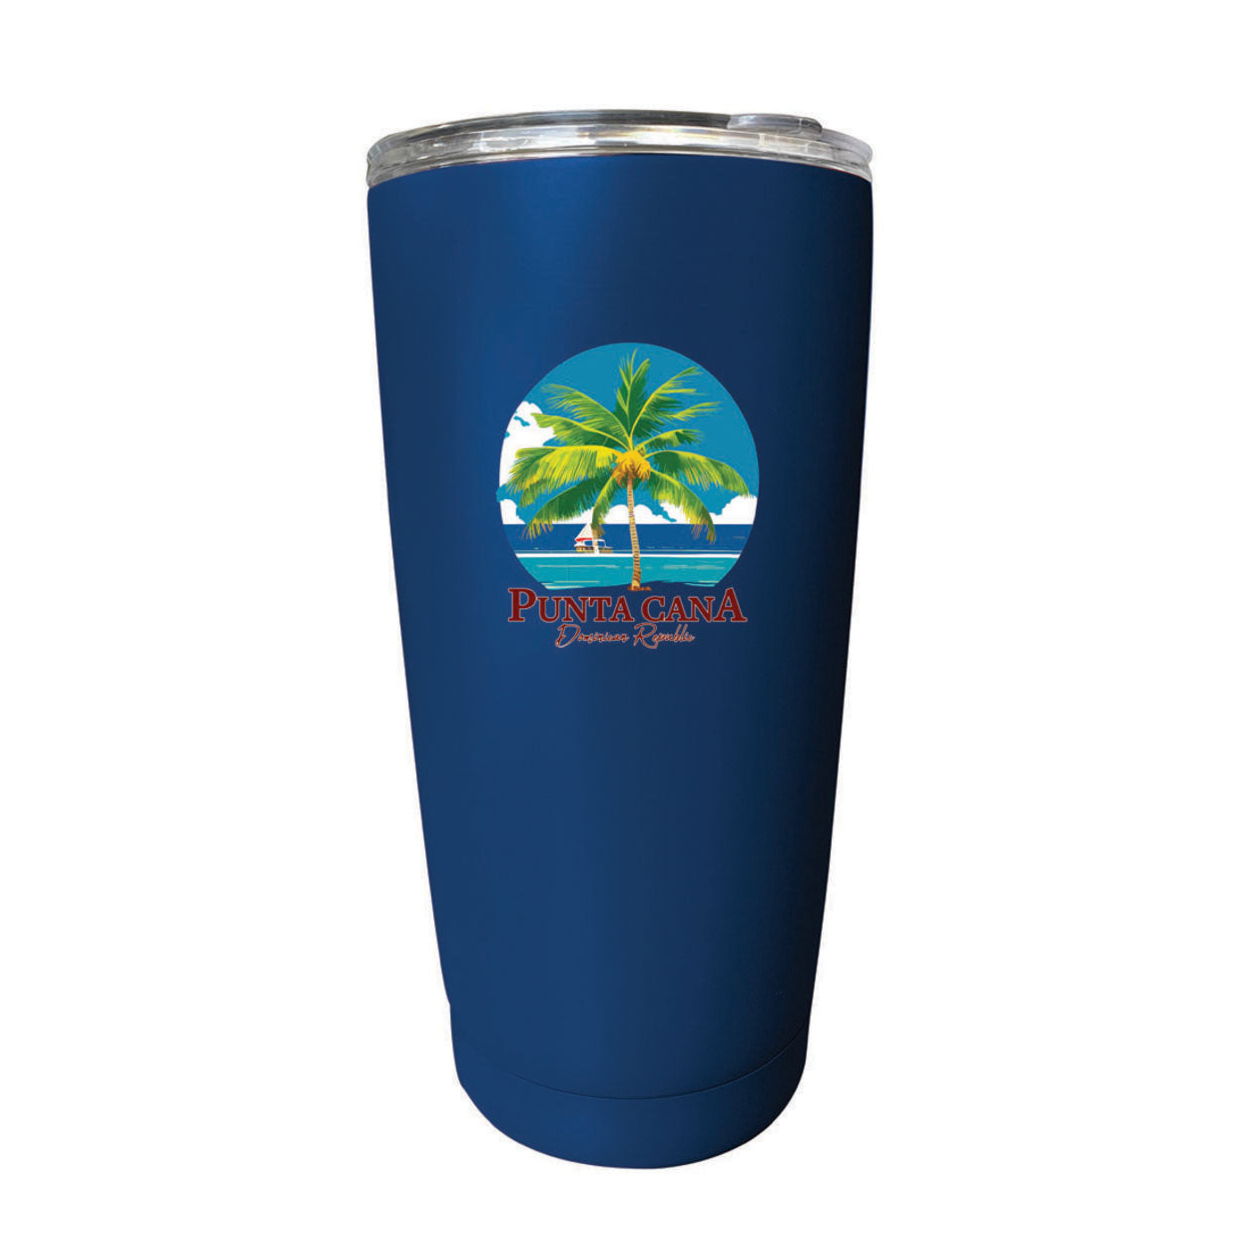 Punta Cana Dominican Republic Souvenir 16 Oz Stainless Steel Insulated Tumbler - Navy, PALM